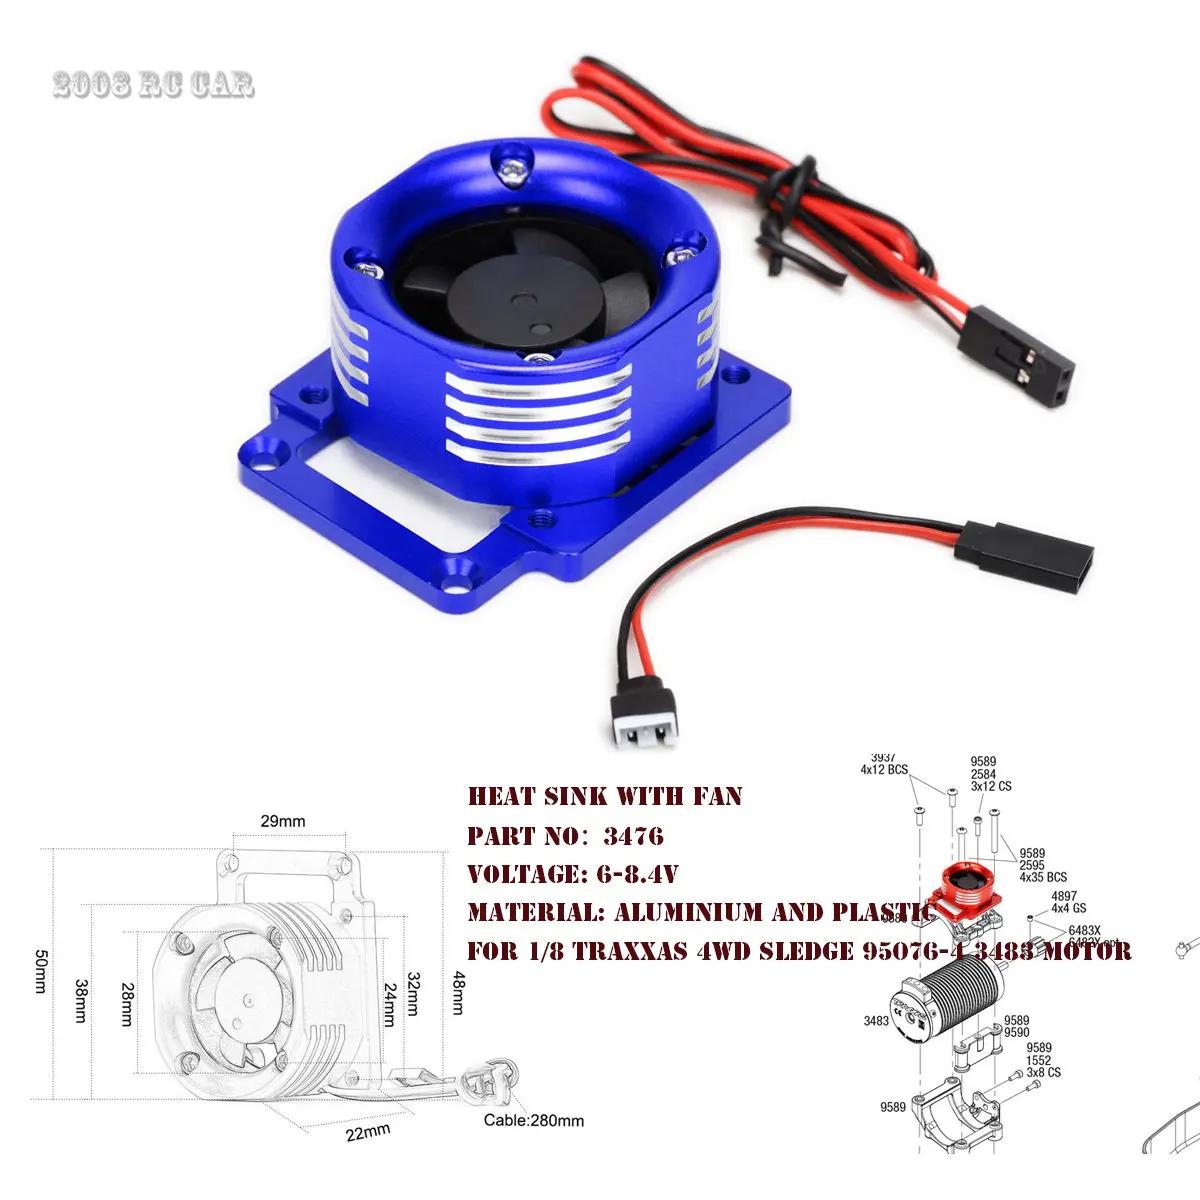 

Aluminium and Plastic 3476 Cooling Fan Kit Fits 3483 Motor For TRAXXAS 1/8 SLEDGE 4WD Off-Load Rc Truck 95076-4